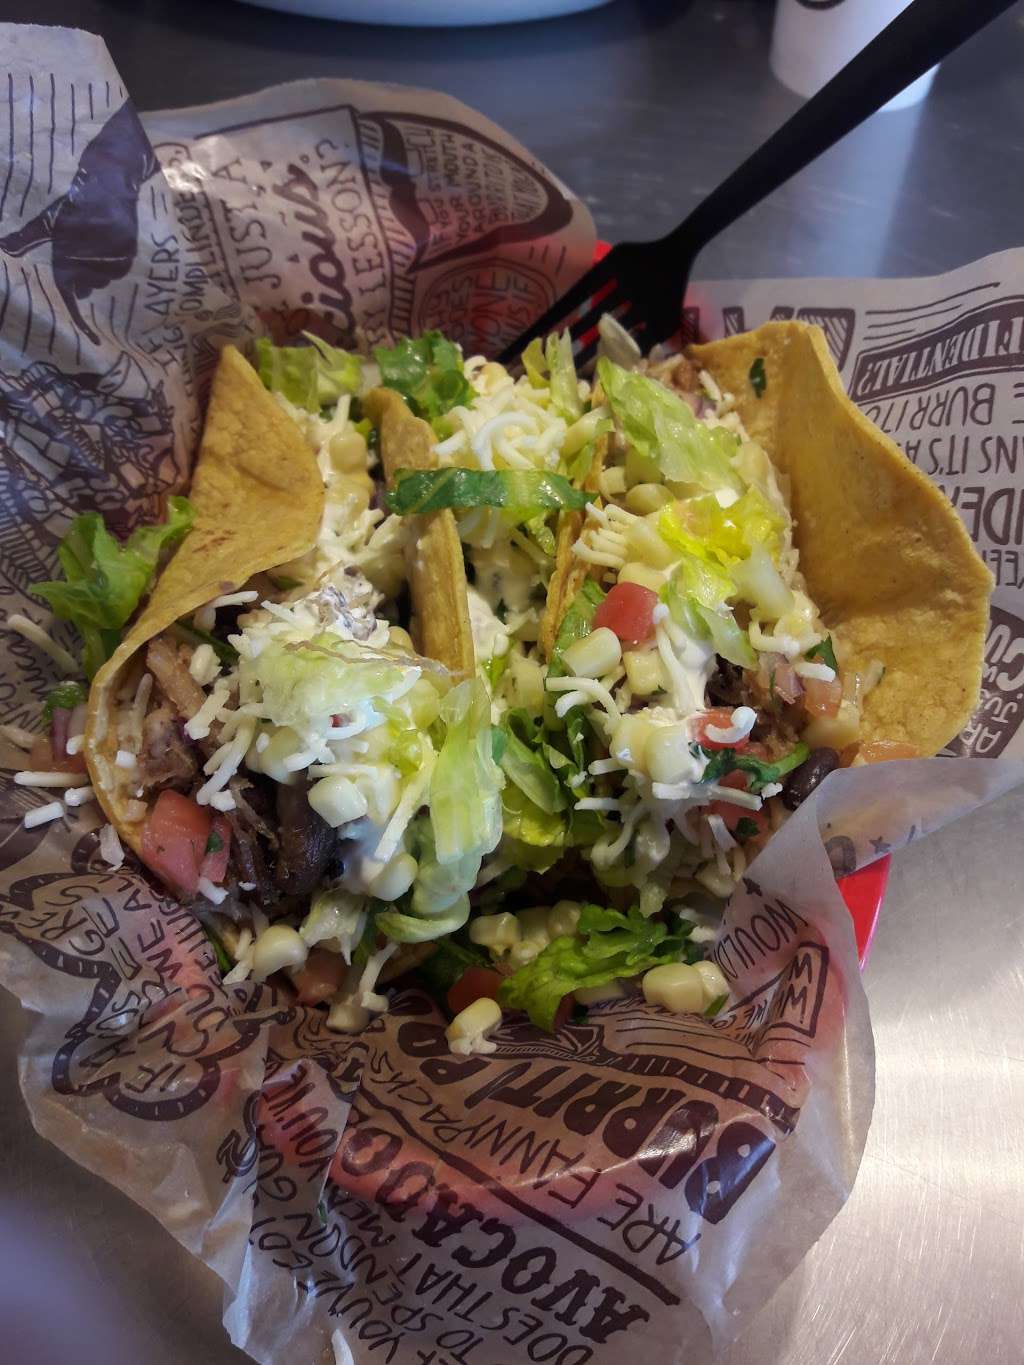 Chipotle Mexican Grill | 750 N Krocks Rd, Allentown, PA 18106 | Phone: (610) 336-8484